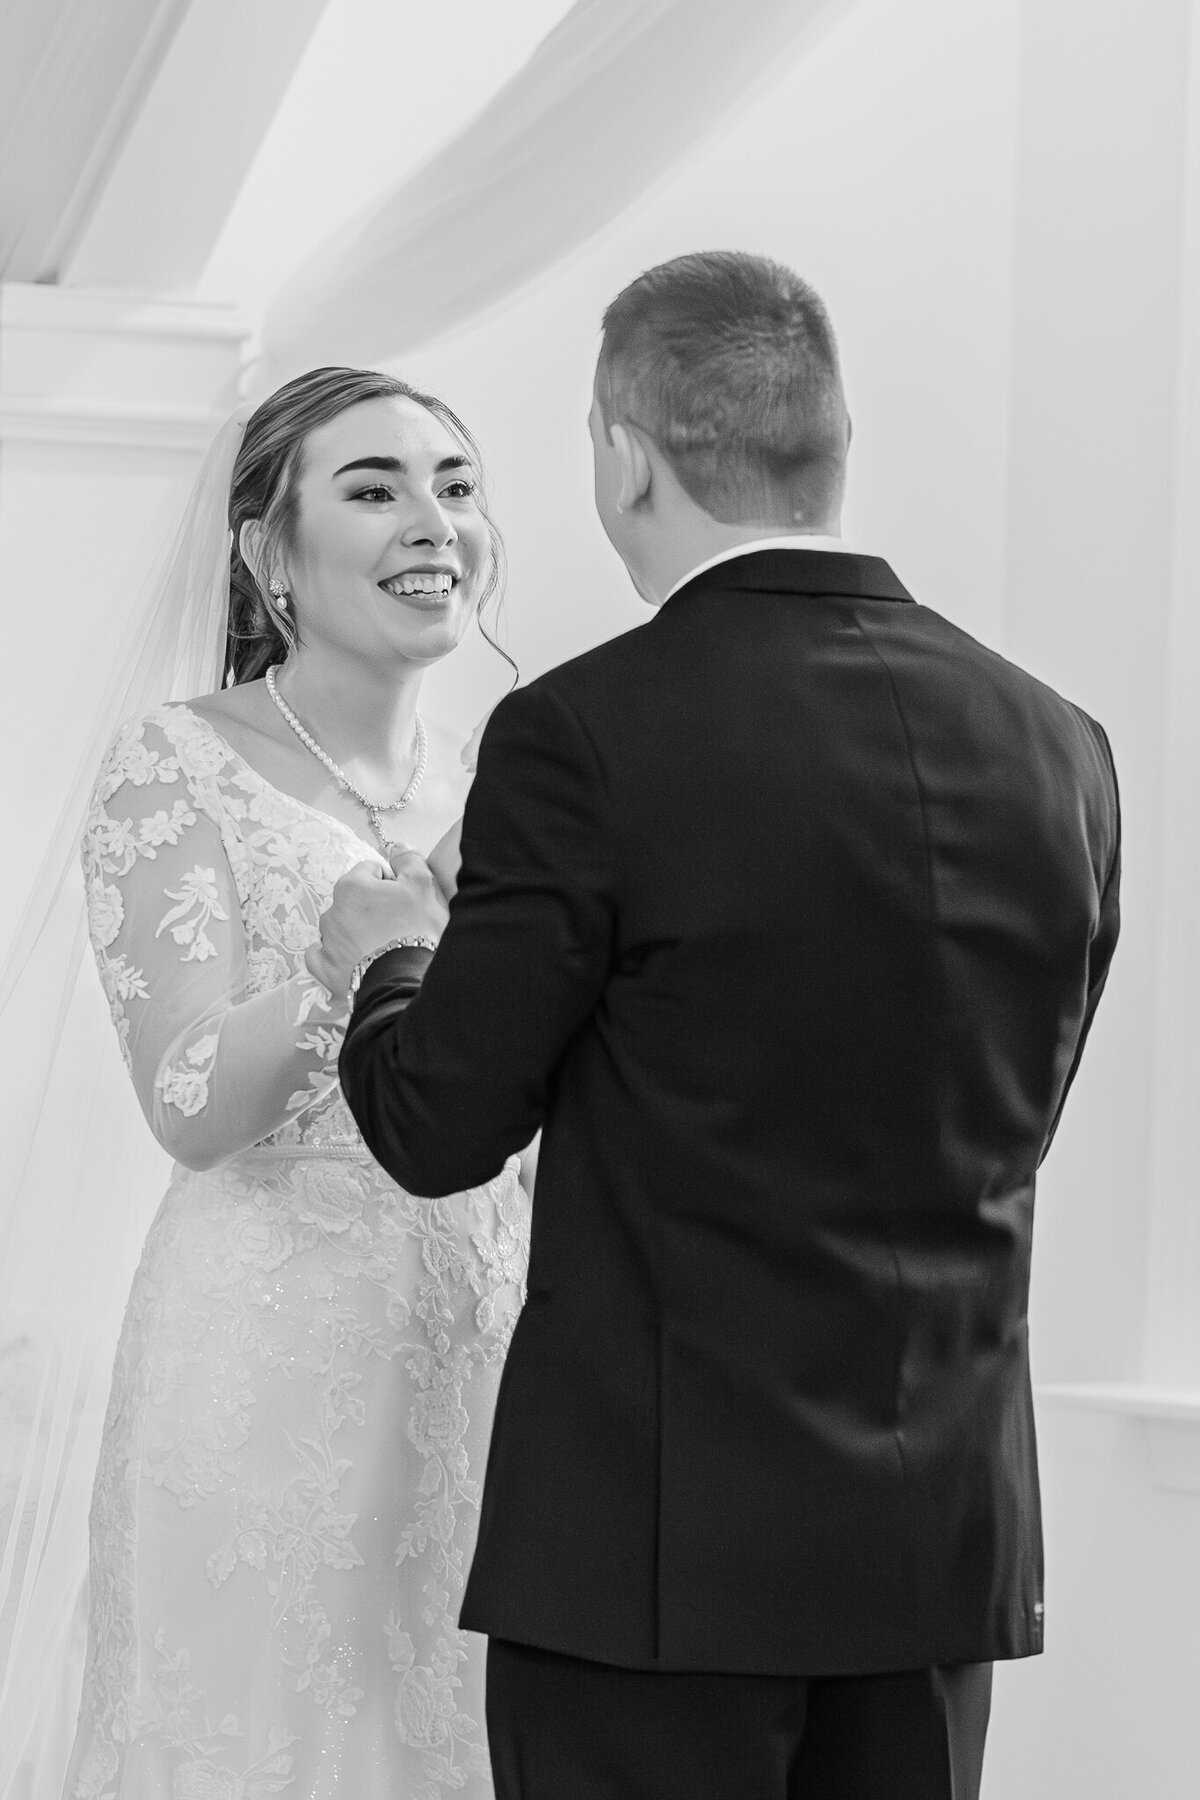 A couple exchanging vows at The Hudson Manor's wedding chapel by JoLynn Photography, a North Carolina wedding photographer